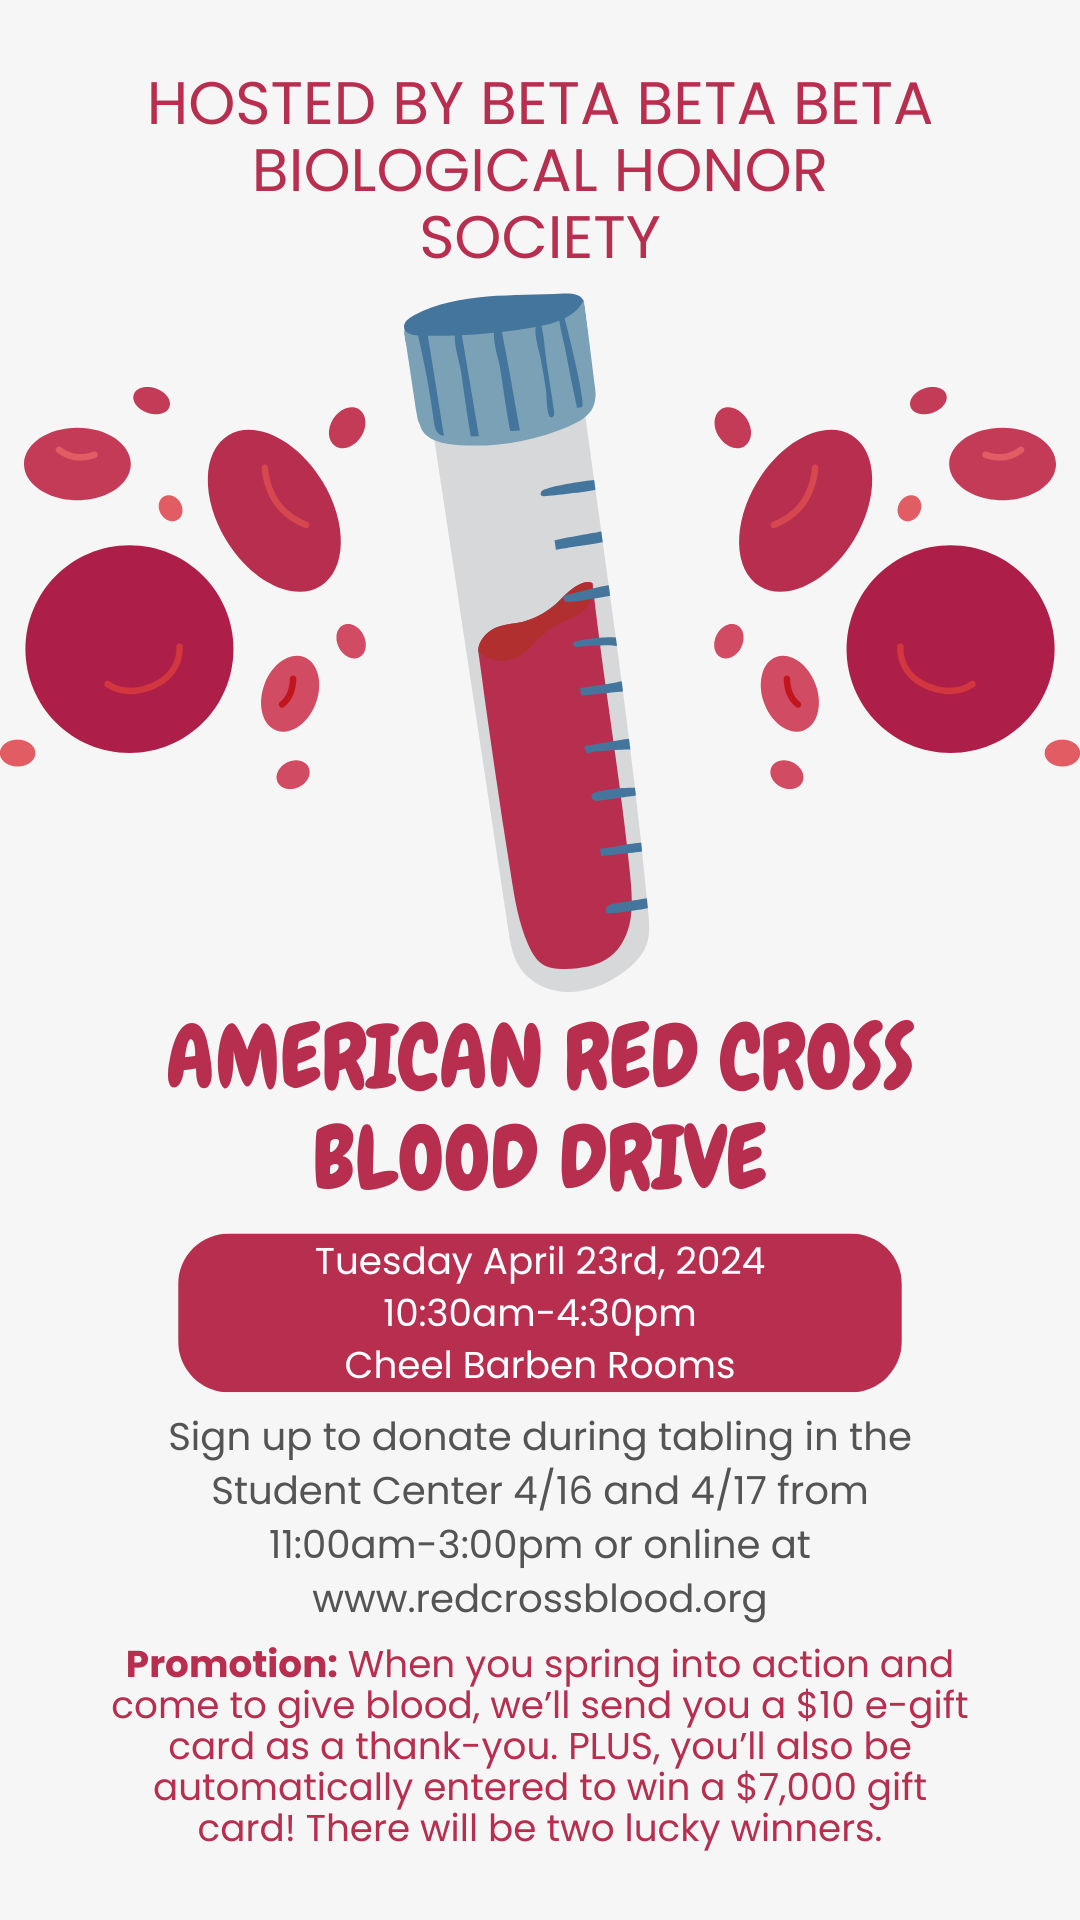 American Red Cross Blood Drive hosted by TriBeta – April 23